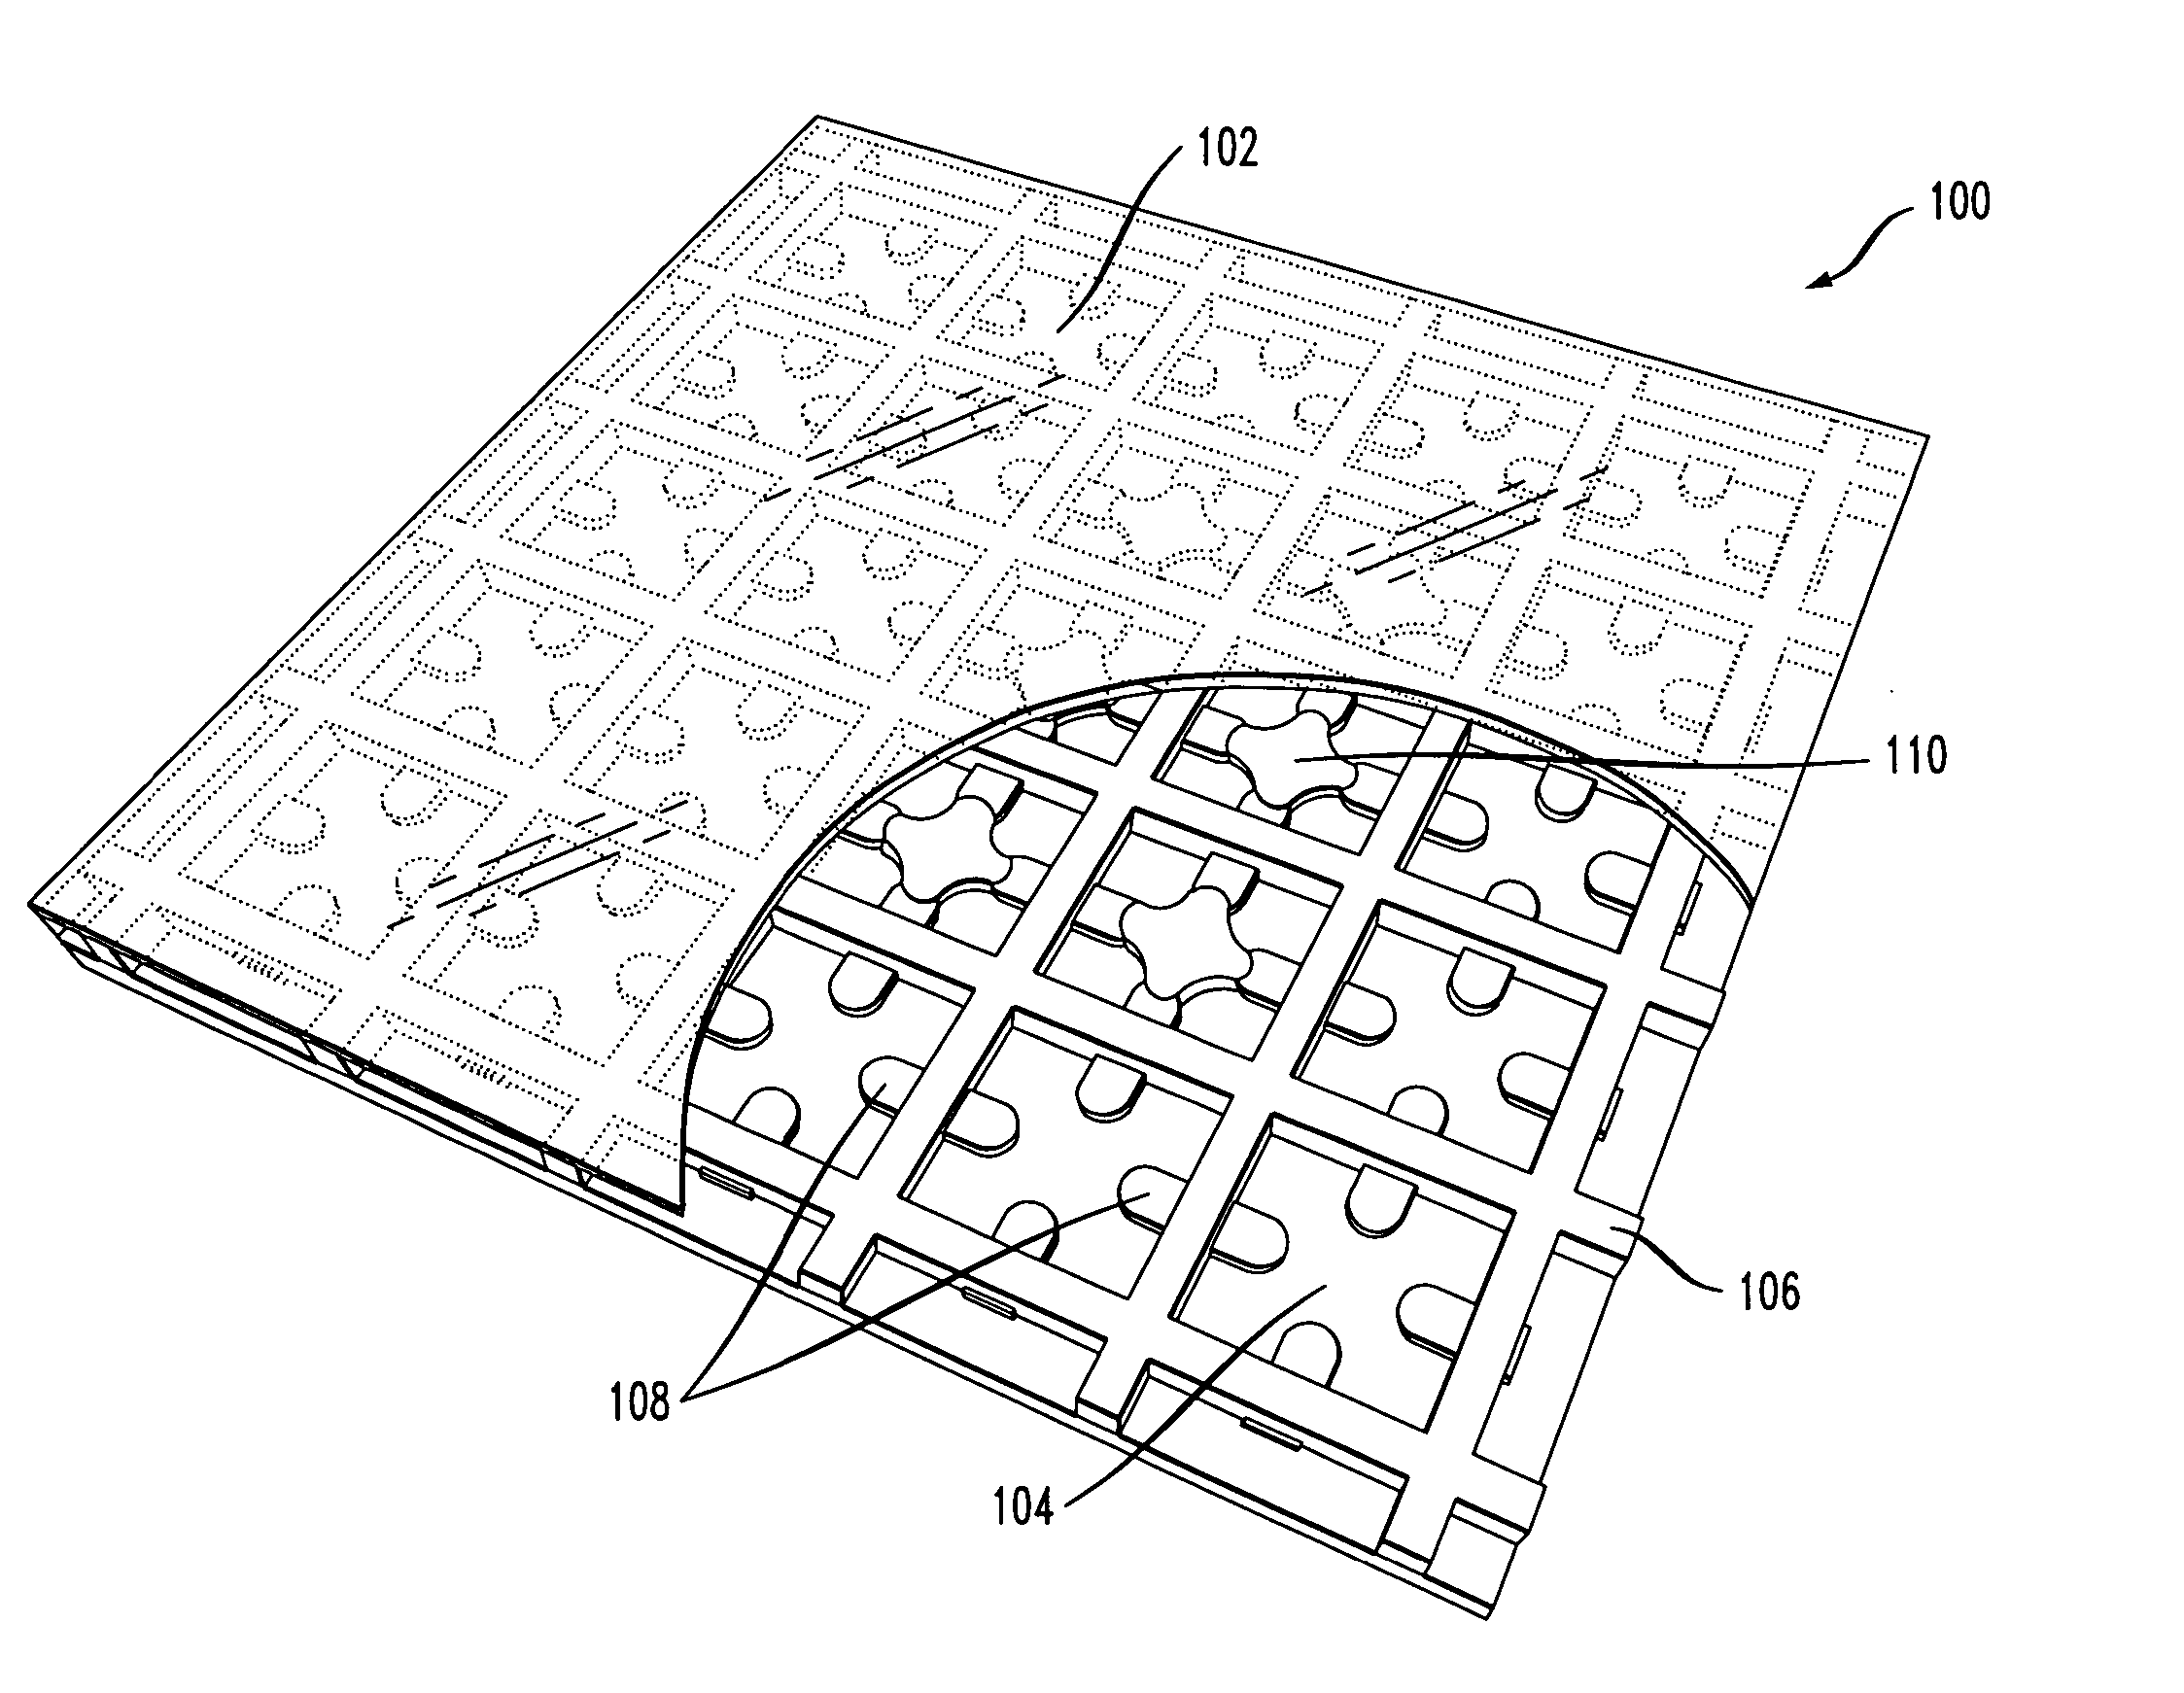 Reconfigurable plasma antenna with interconnected gas enclosures